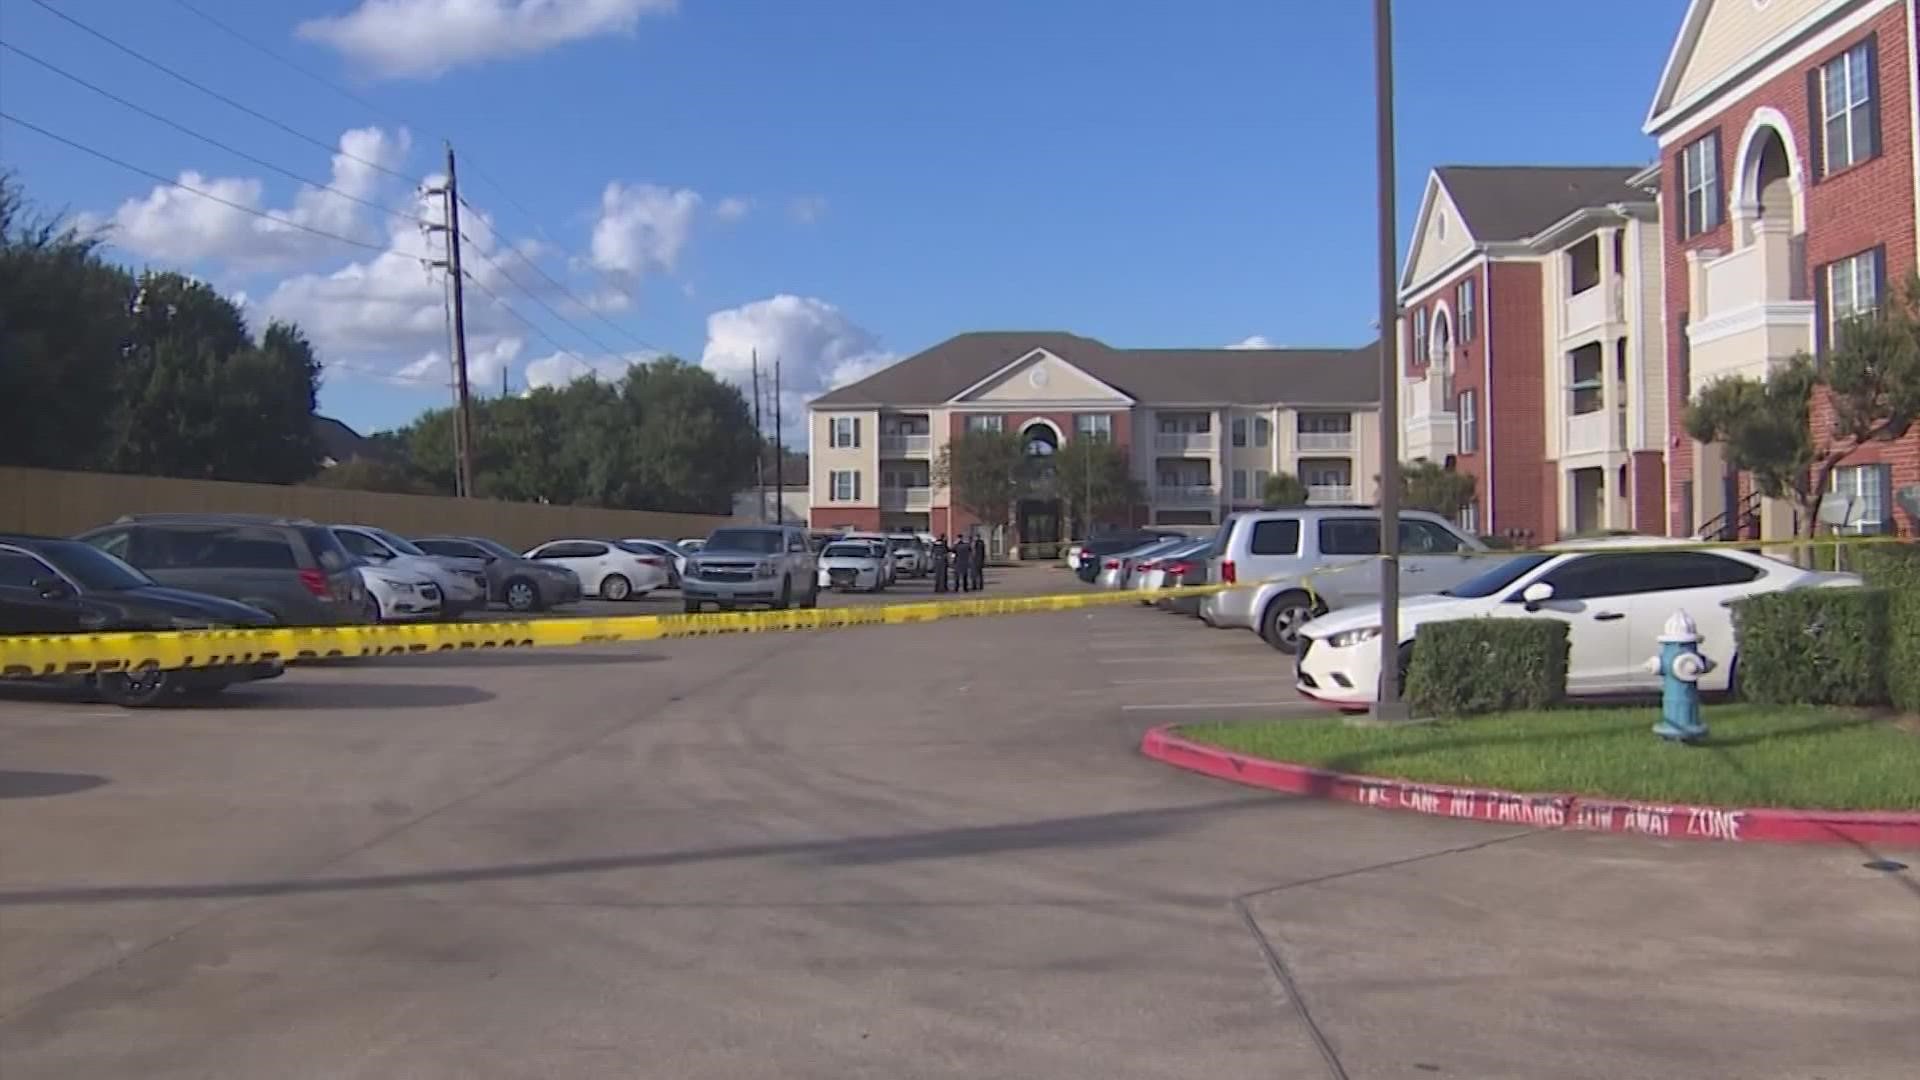 Harris County Sheriff deputies found three children abandoned inside a west Harris County apartment complex Sunday along with skeletal remains.